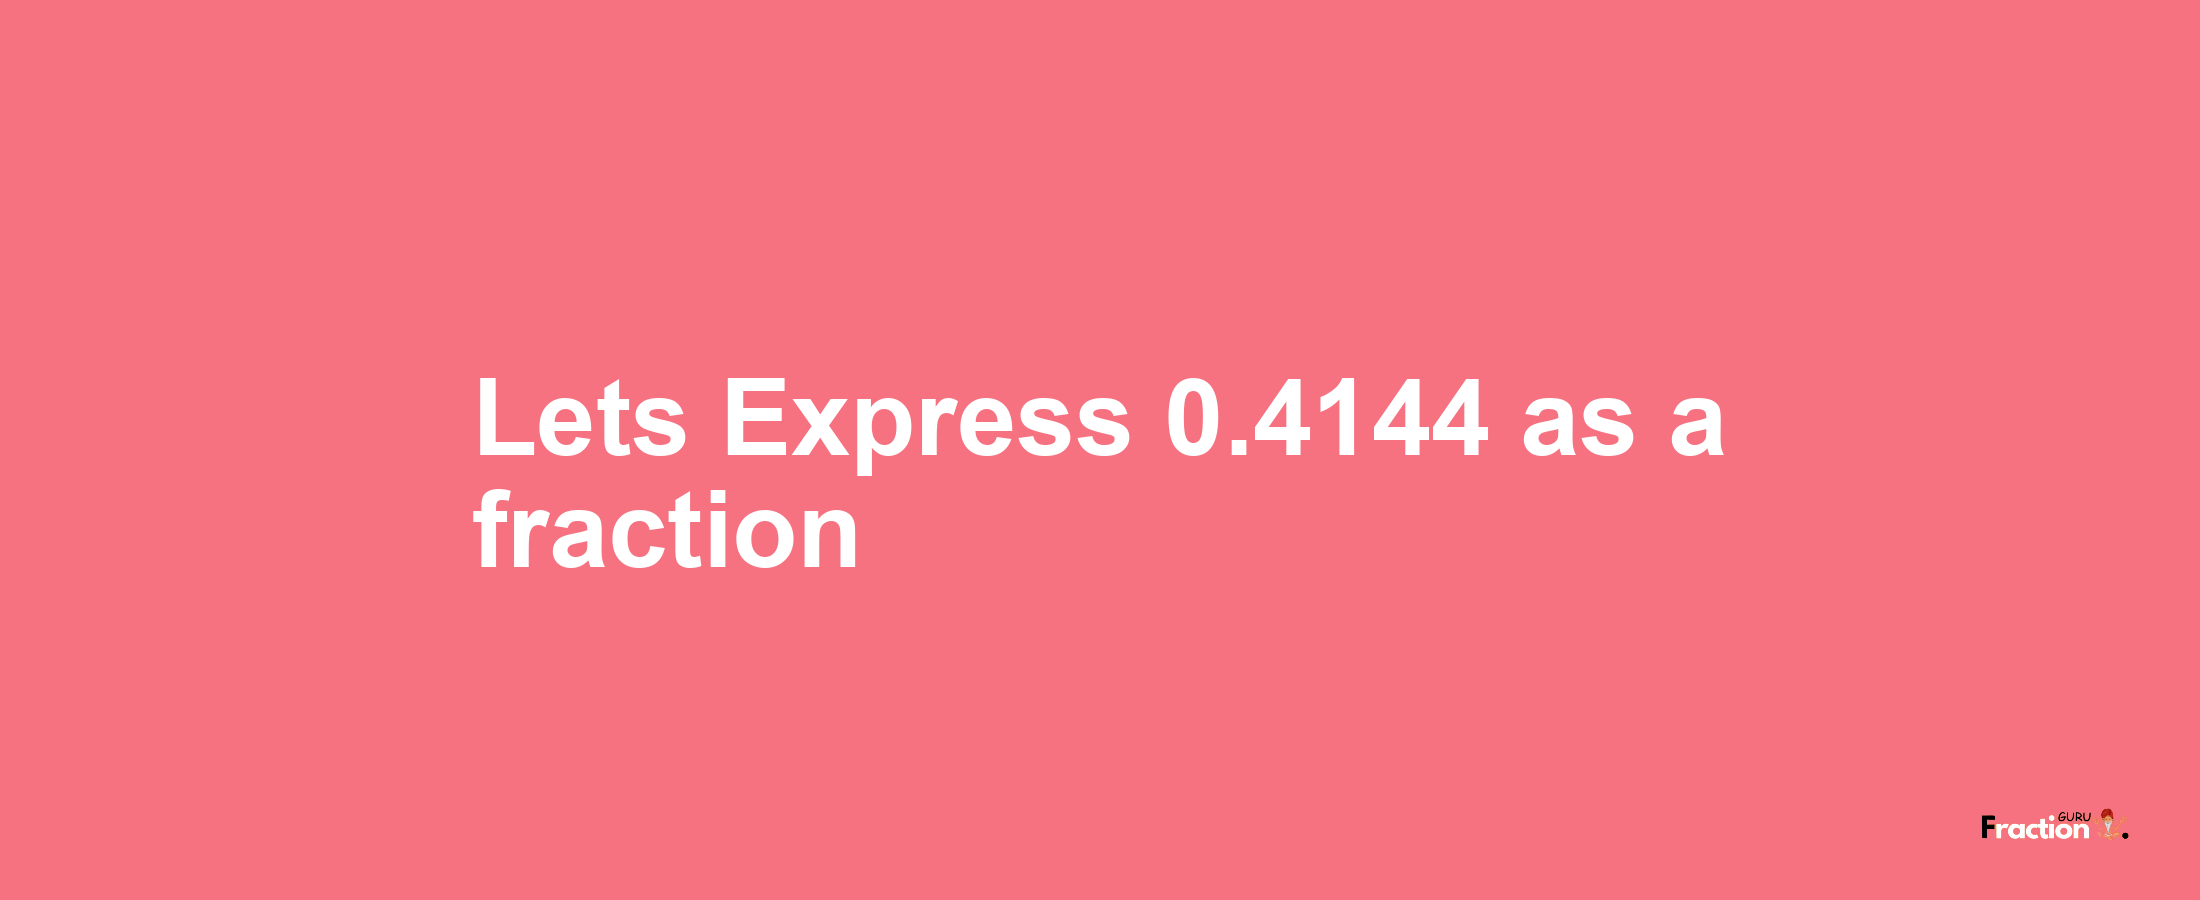 Lets Express 0.4144 as afraction